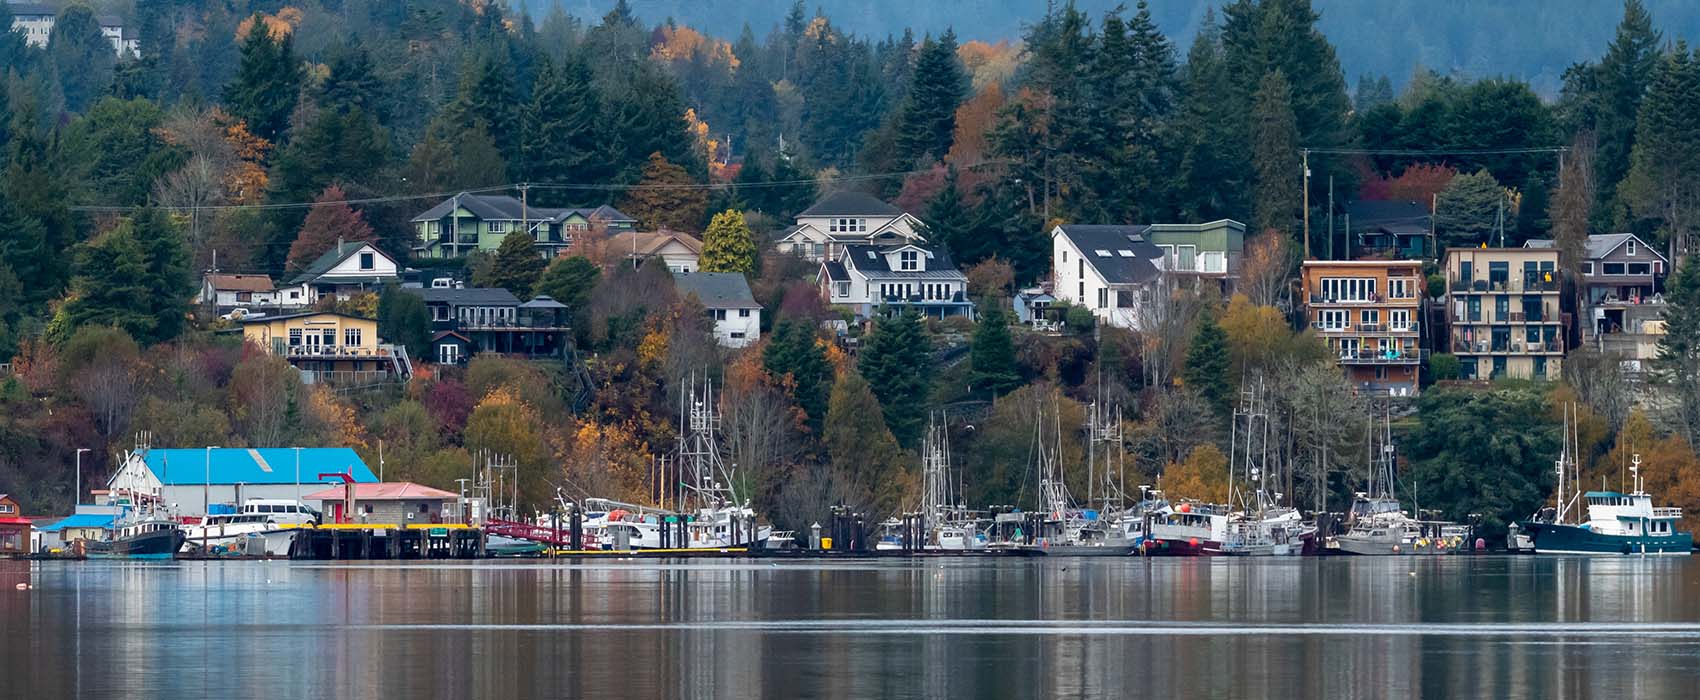 Waterfront townscape, Sooke, Vancouver Island, British Columbia, Canada